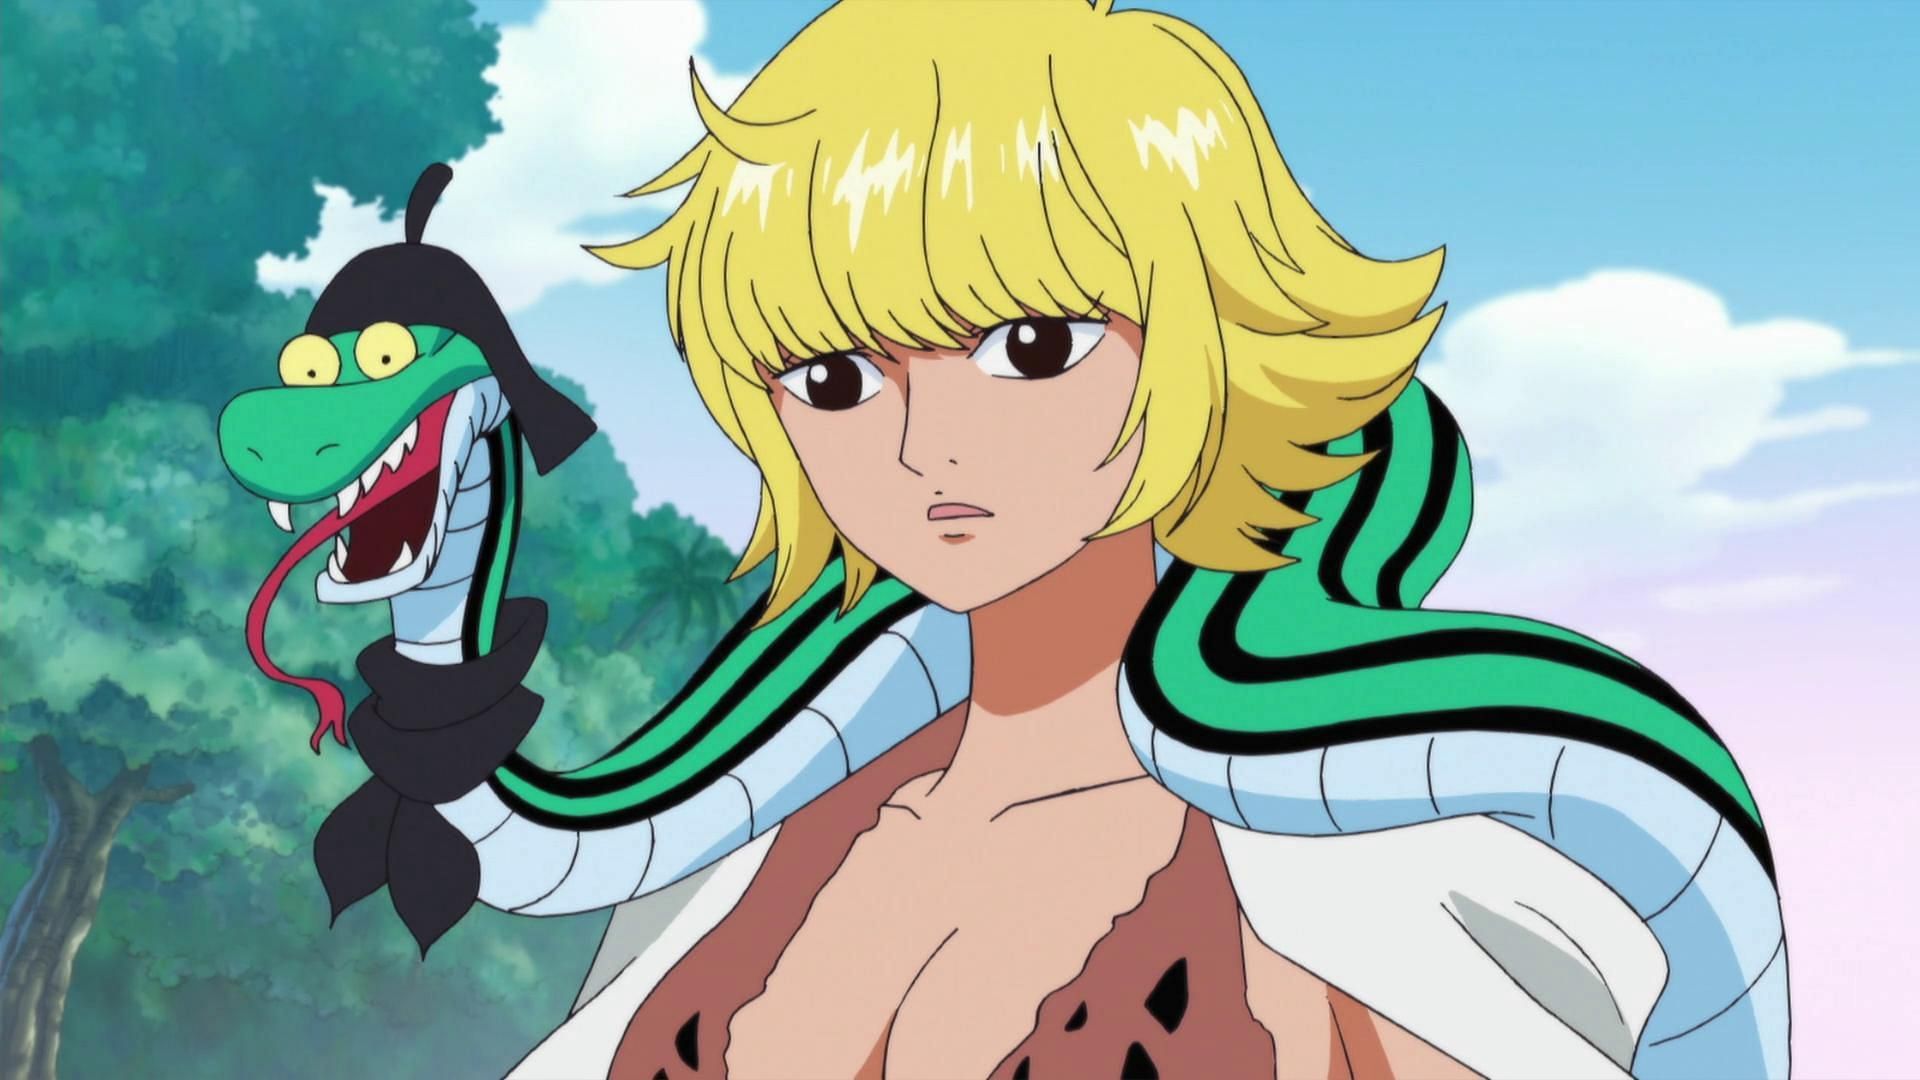 Marguerite as seen in the One Piece anime series (Image via Toei Animation)